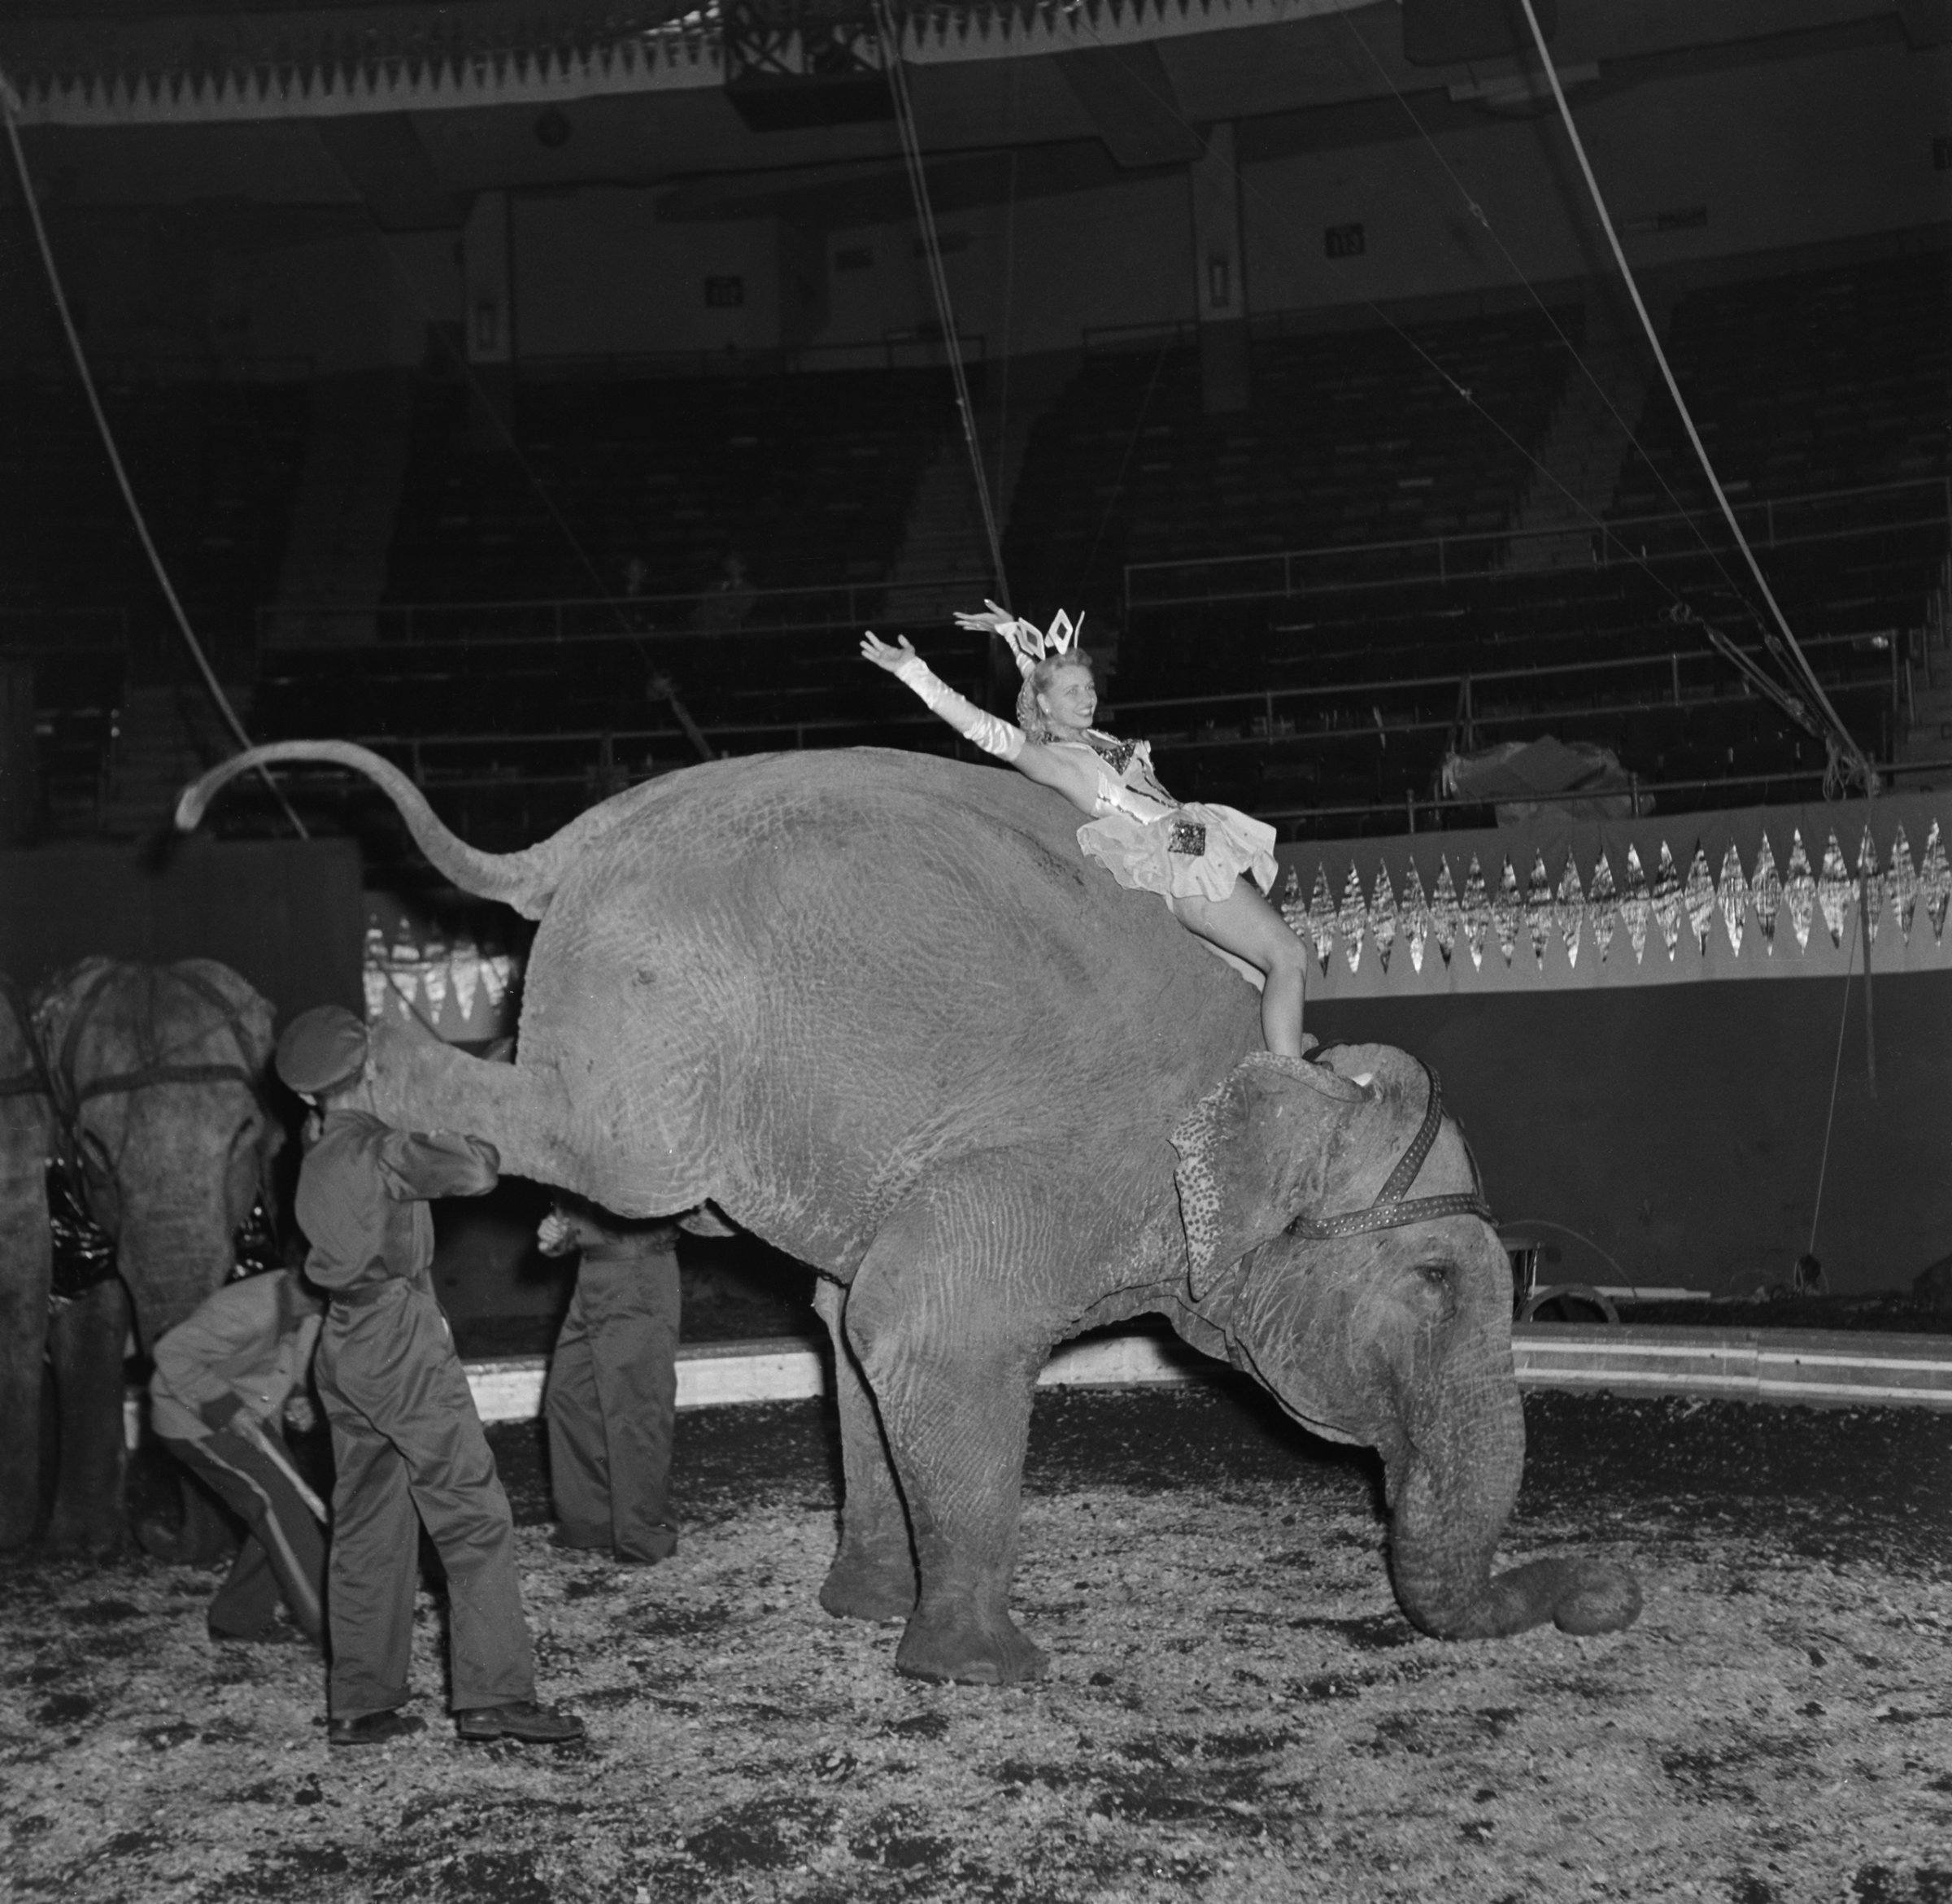 NEW YORK, NY - APRIL 7,1948: A performer rides an elephant to entertain the audience during Ringling Bros. and Barnum &amp; Bailey Circus in New York, New York. (Photo by Earl Leaf/Michael Ochs Archives/Getty Images)